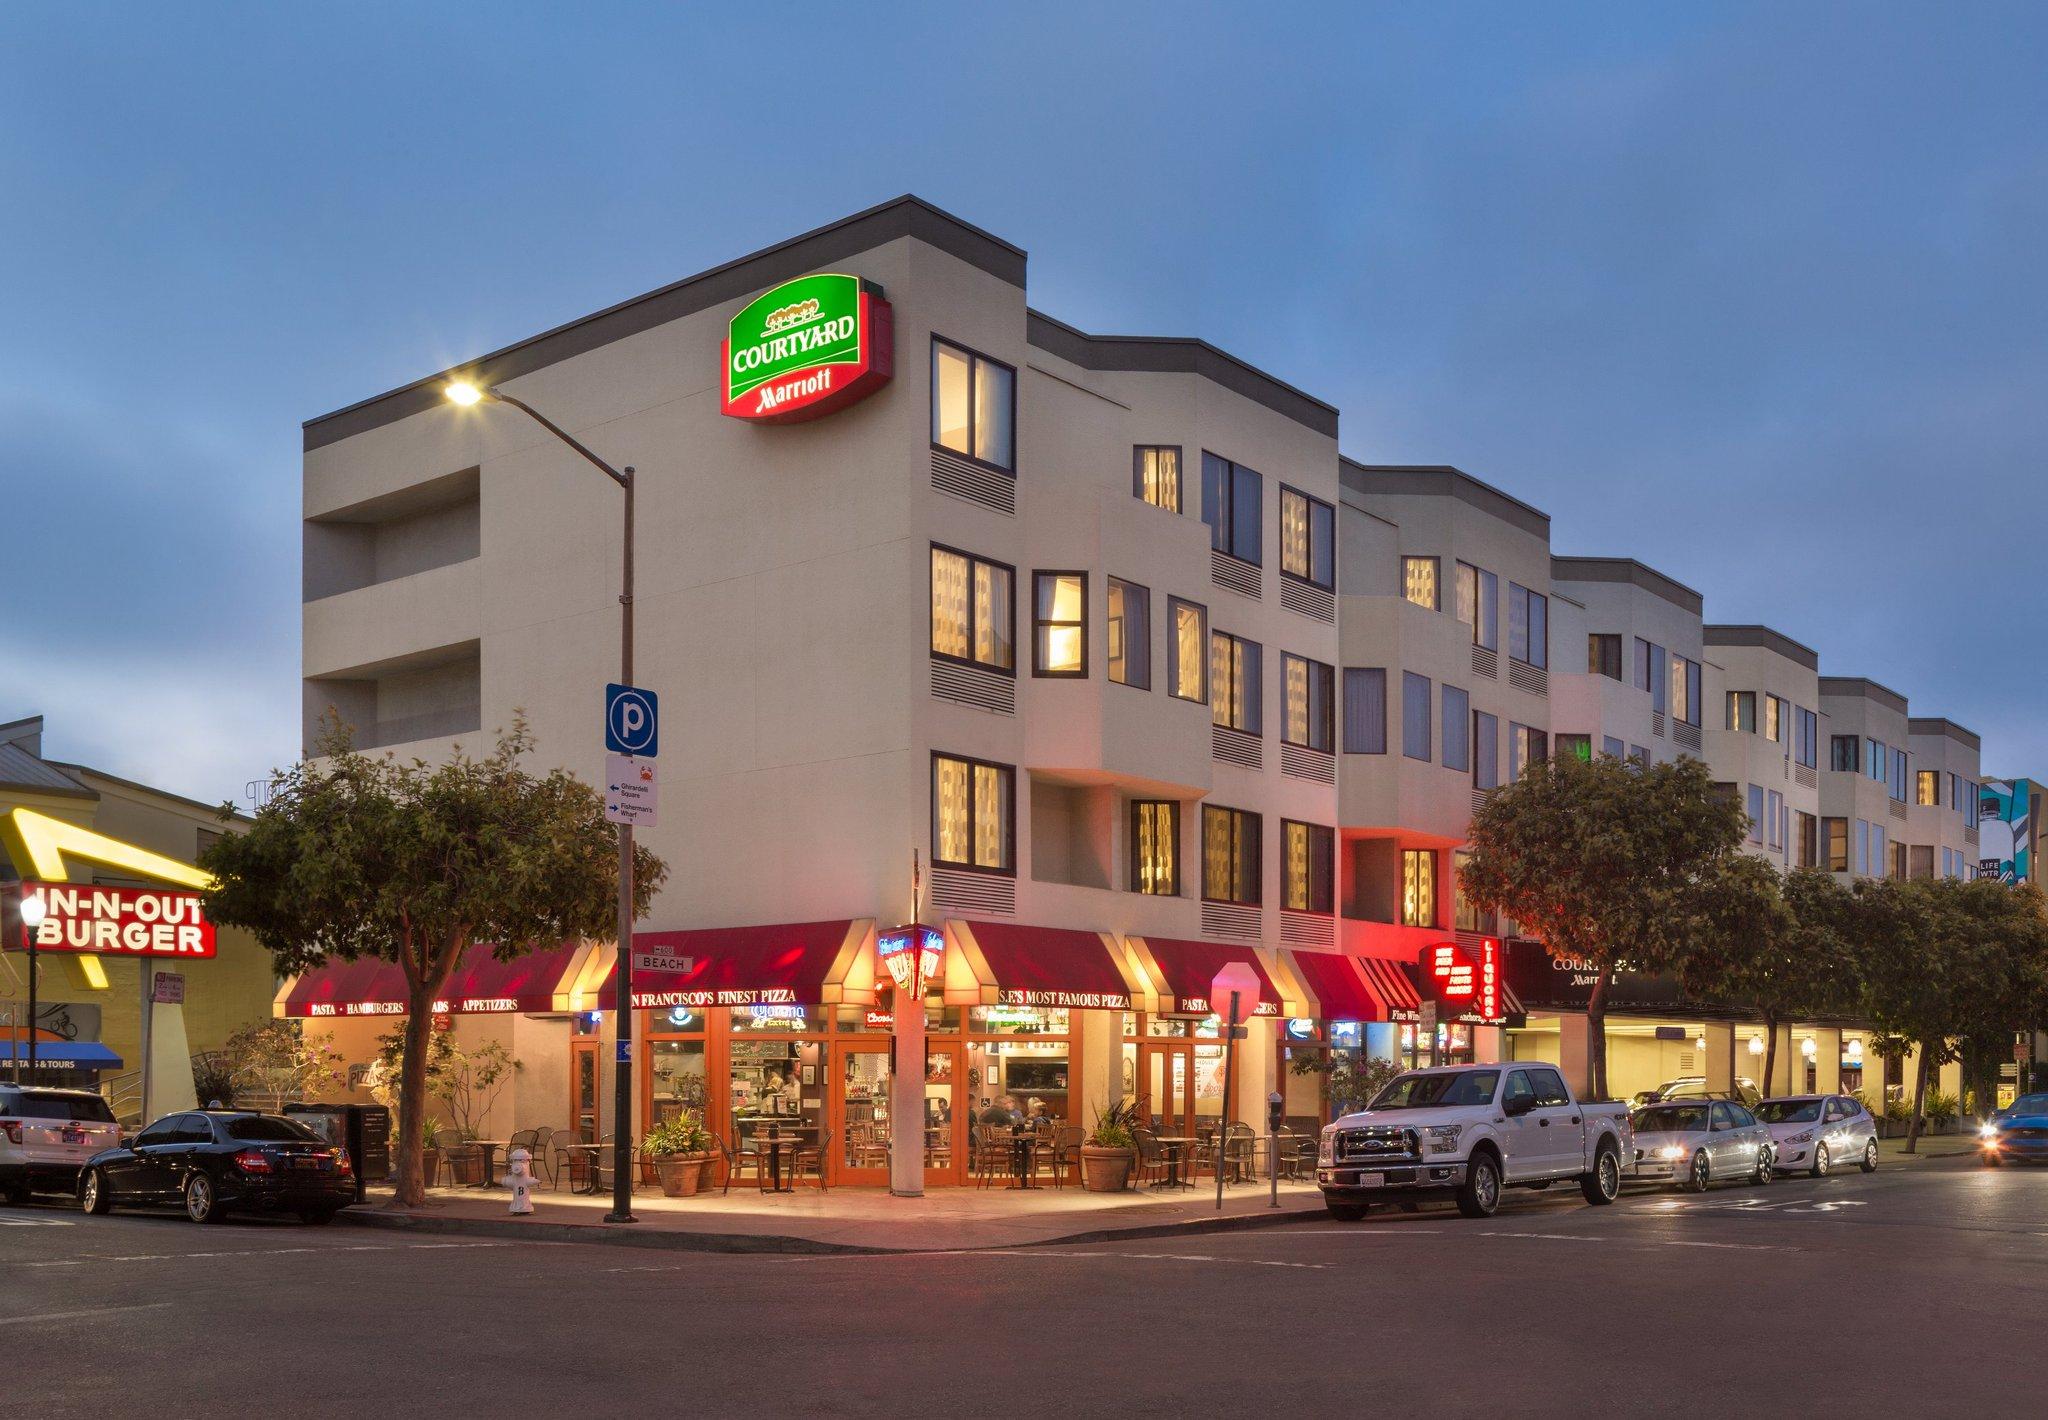 Courtyard by Marriott Fishermans Wharf image 1